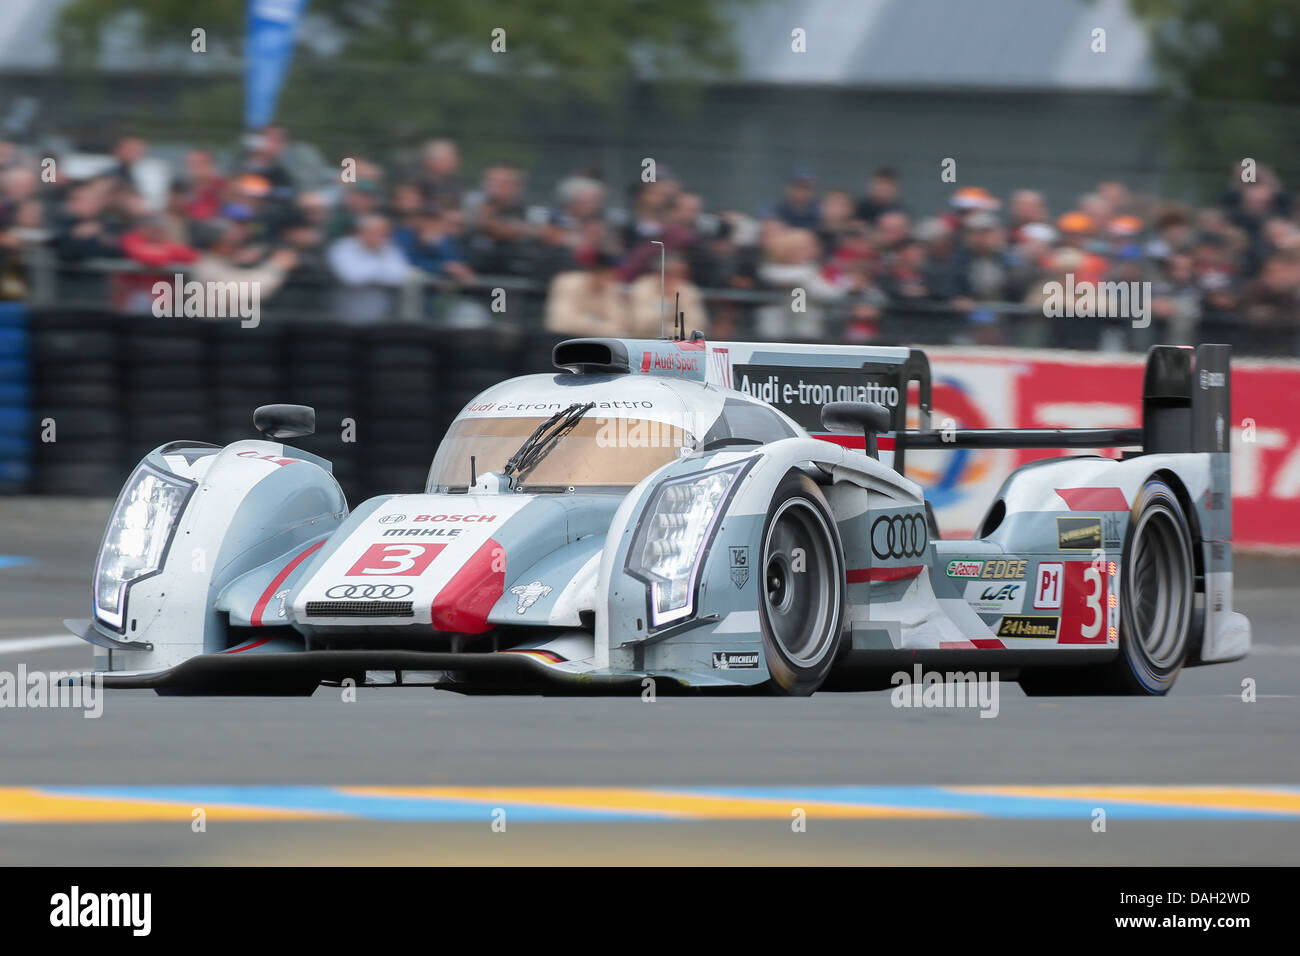 LE MANS, FRANCE - JUNE 23 Audi #3 competes in the 24 hours of Le Mans 2013 Stock Photo